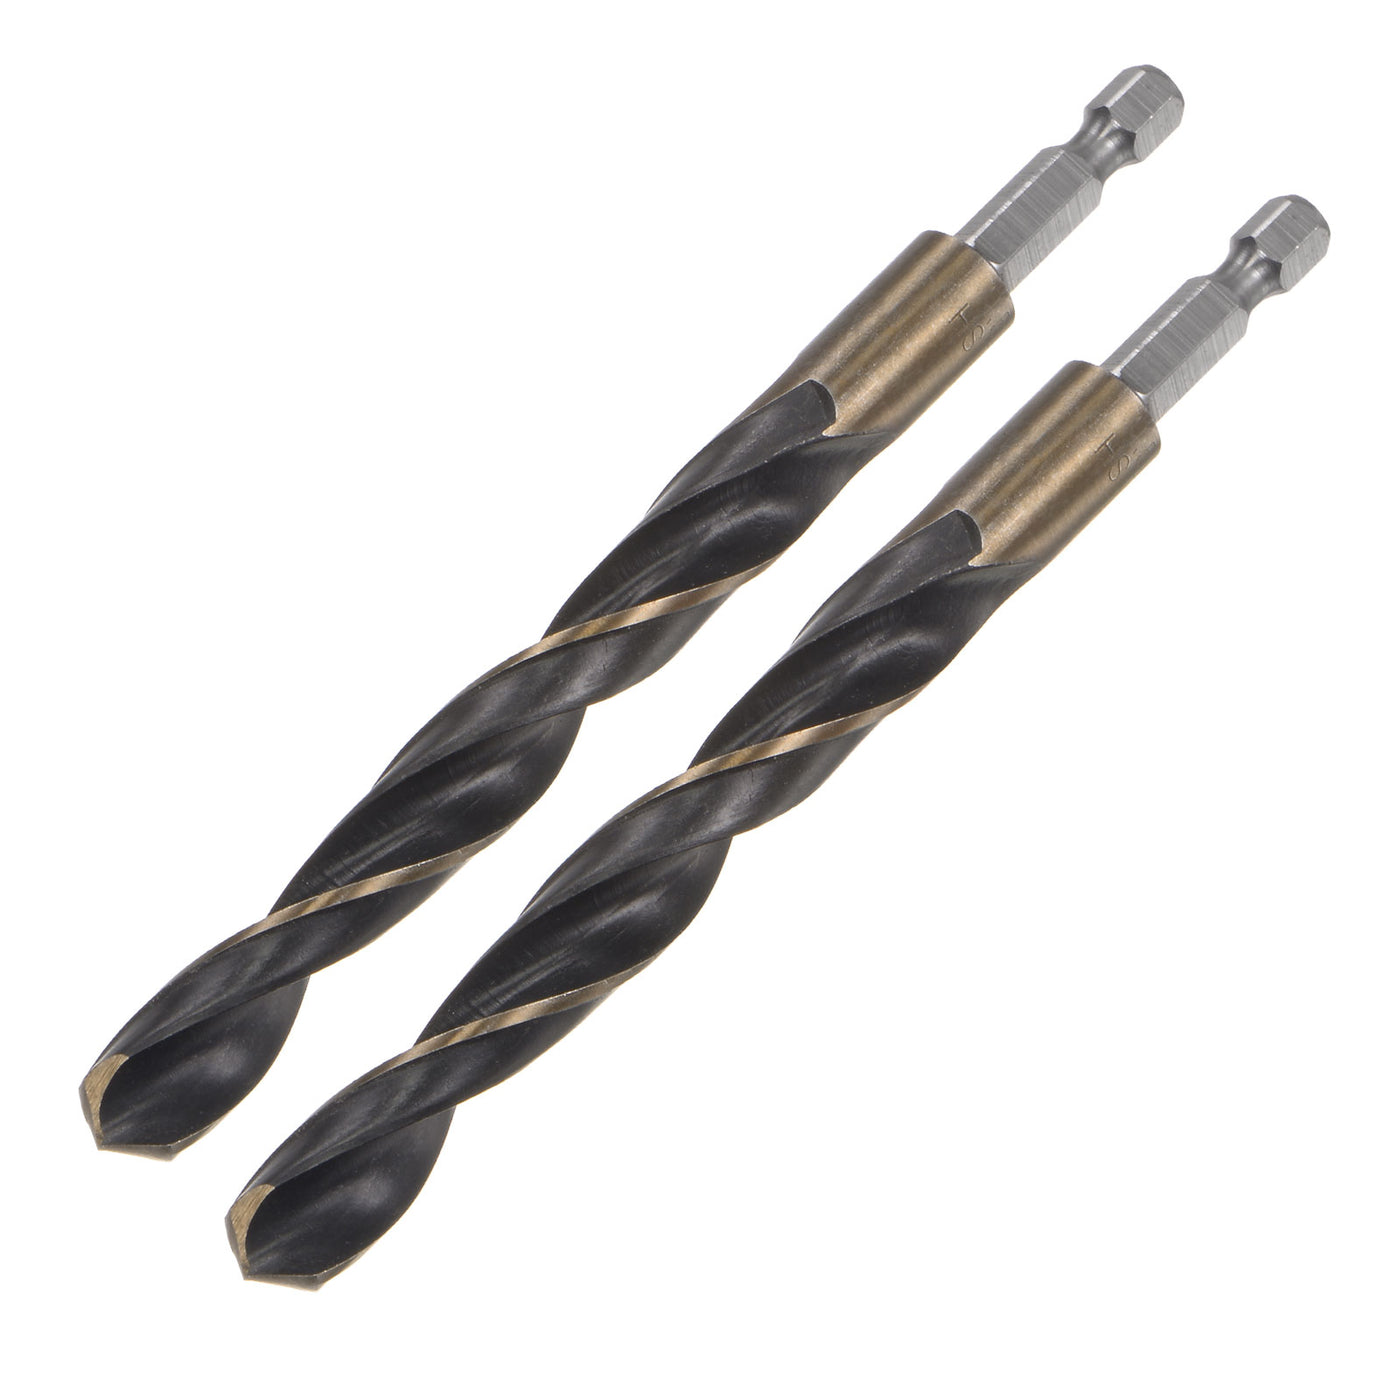 uxcell Uxcell 2Pcs 11.5mm High Speed Steel Twist Drill Bit with Hex Shank 140mm Length